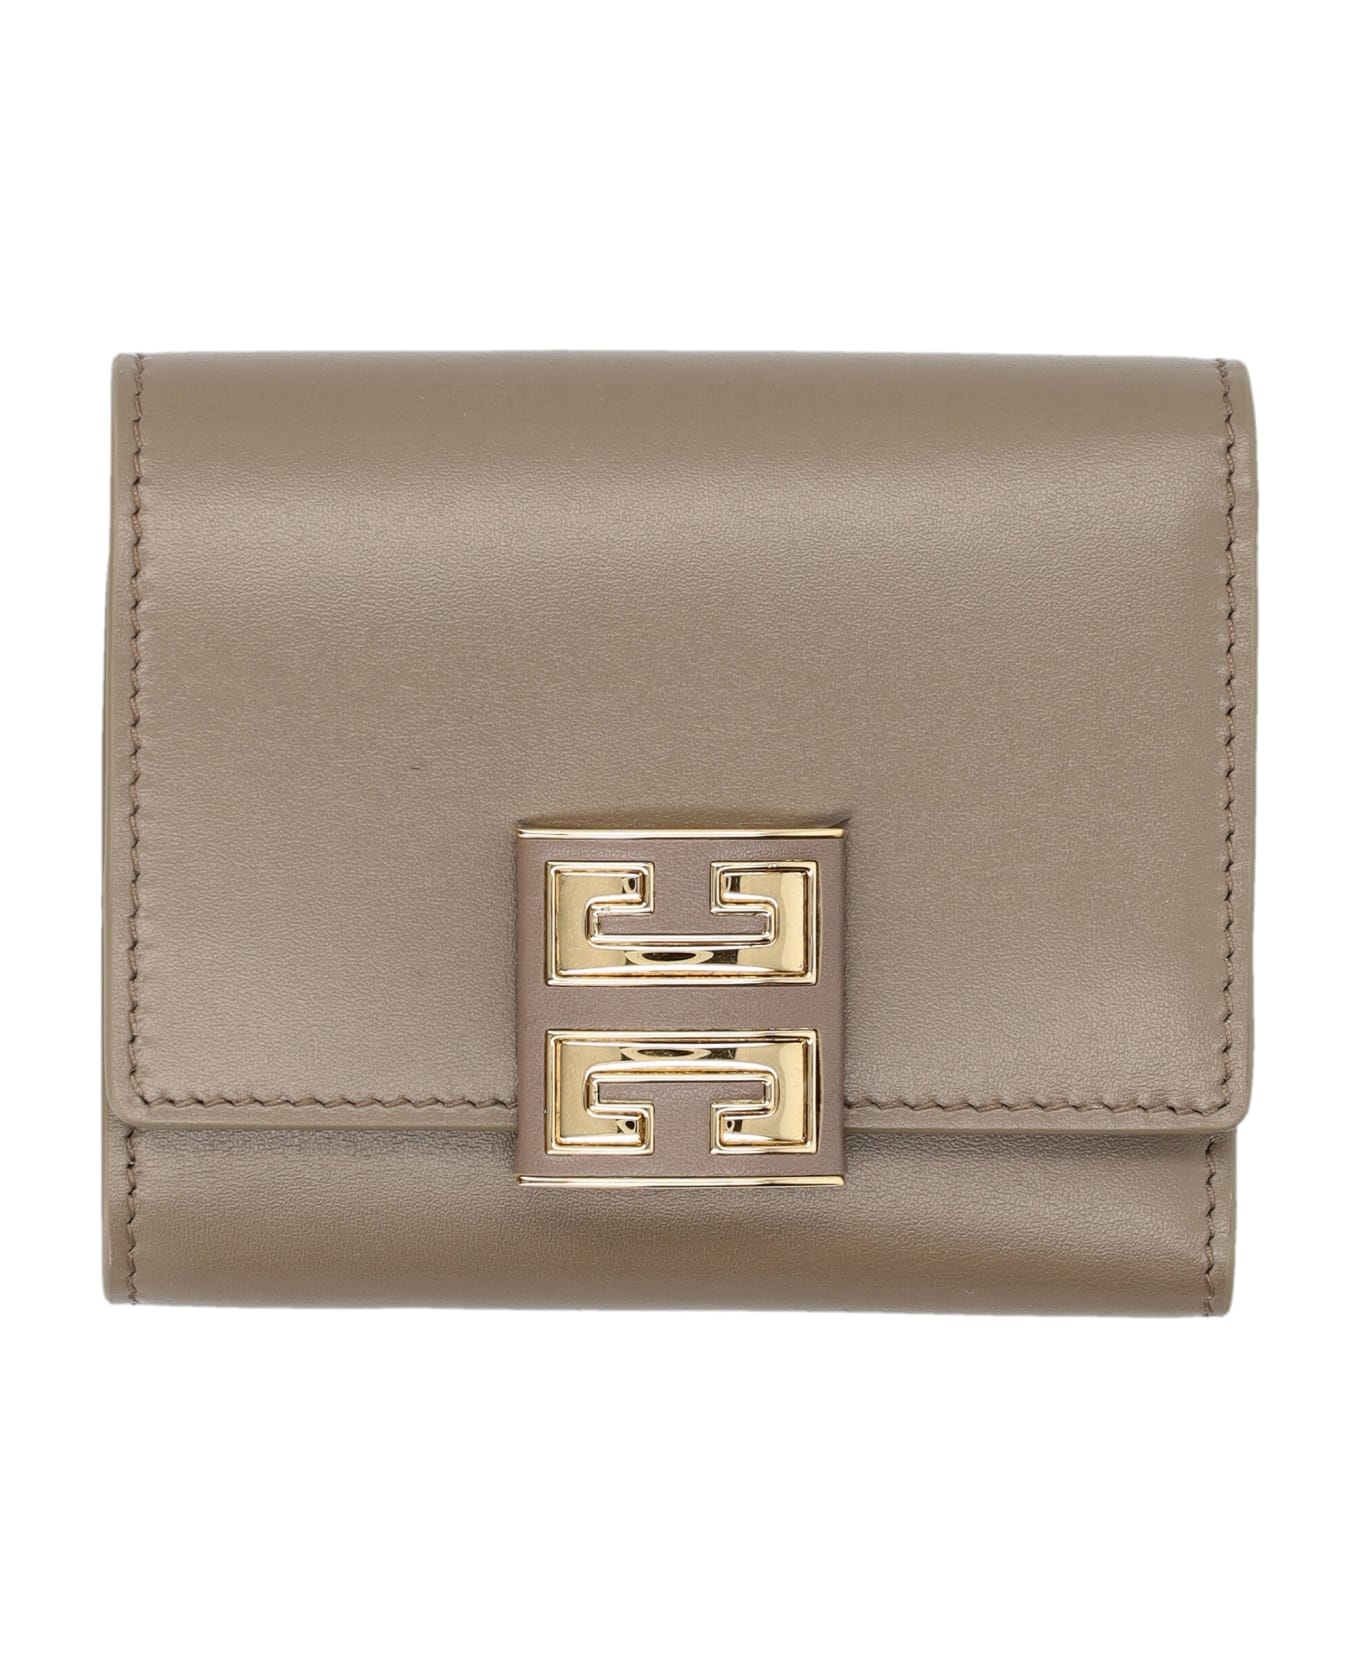 Givenchy 4g- Trifold Wallet - TAUPE